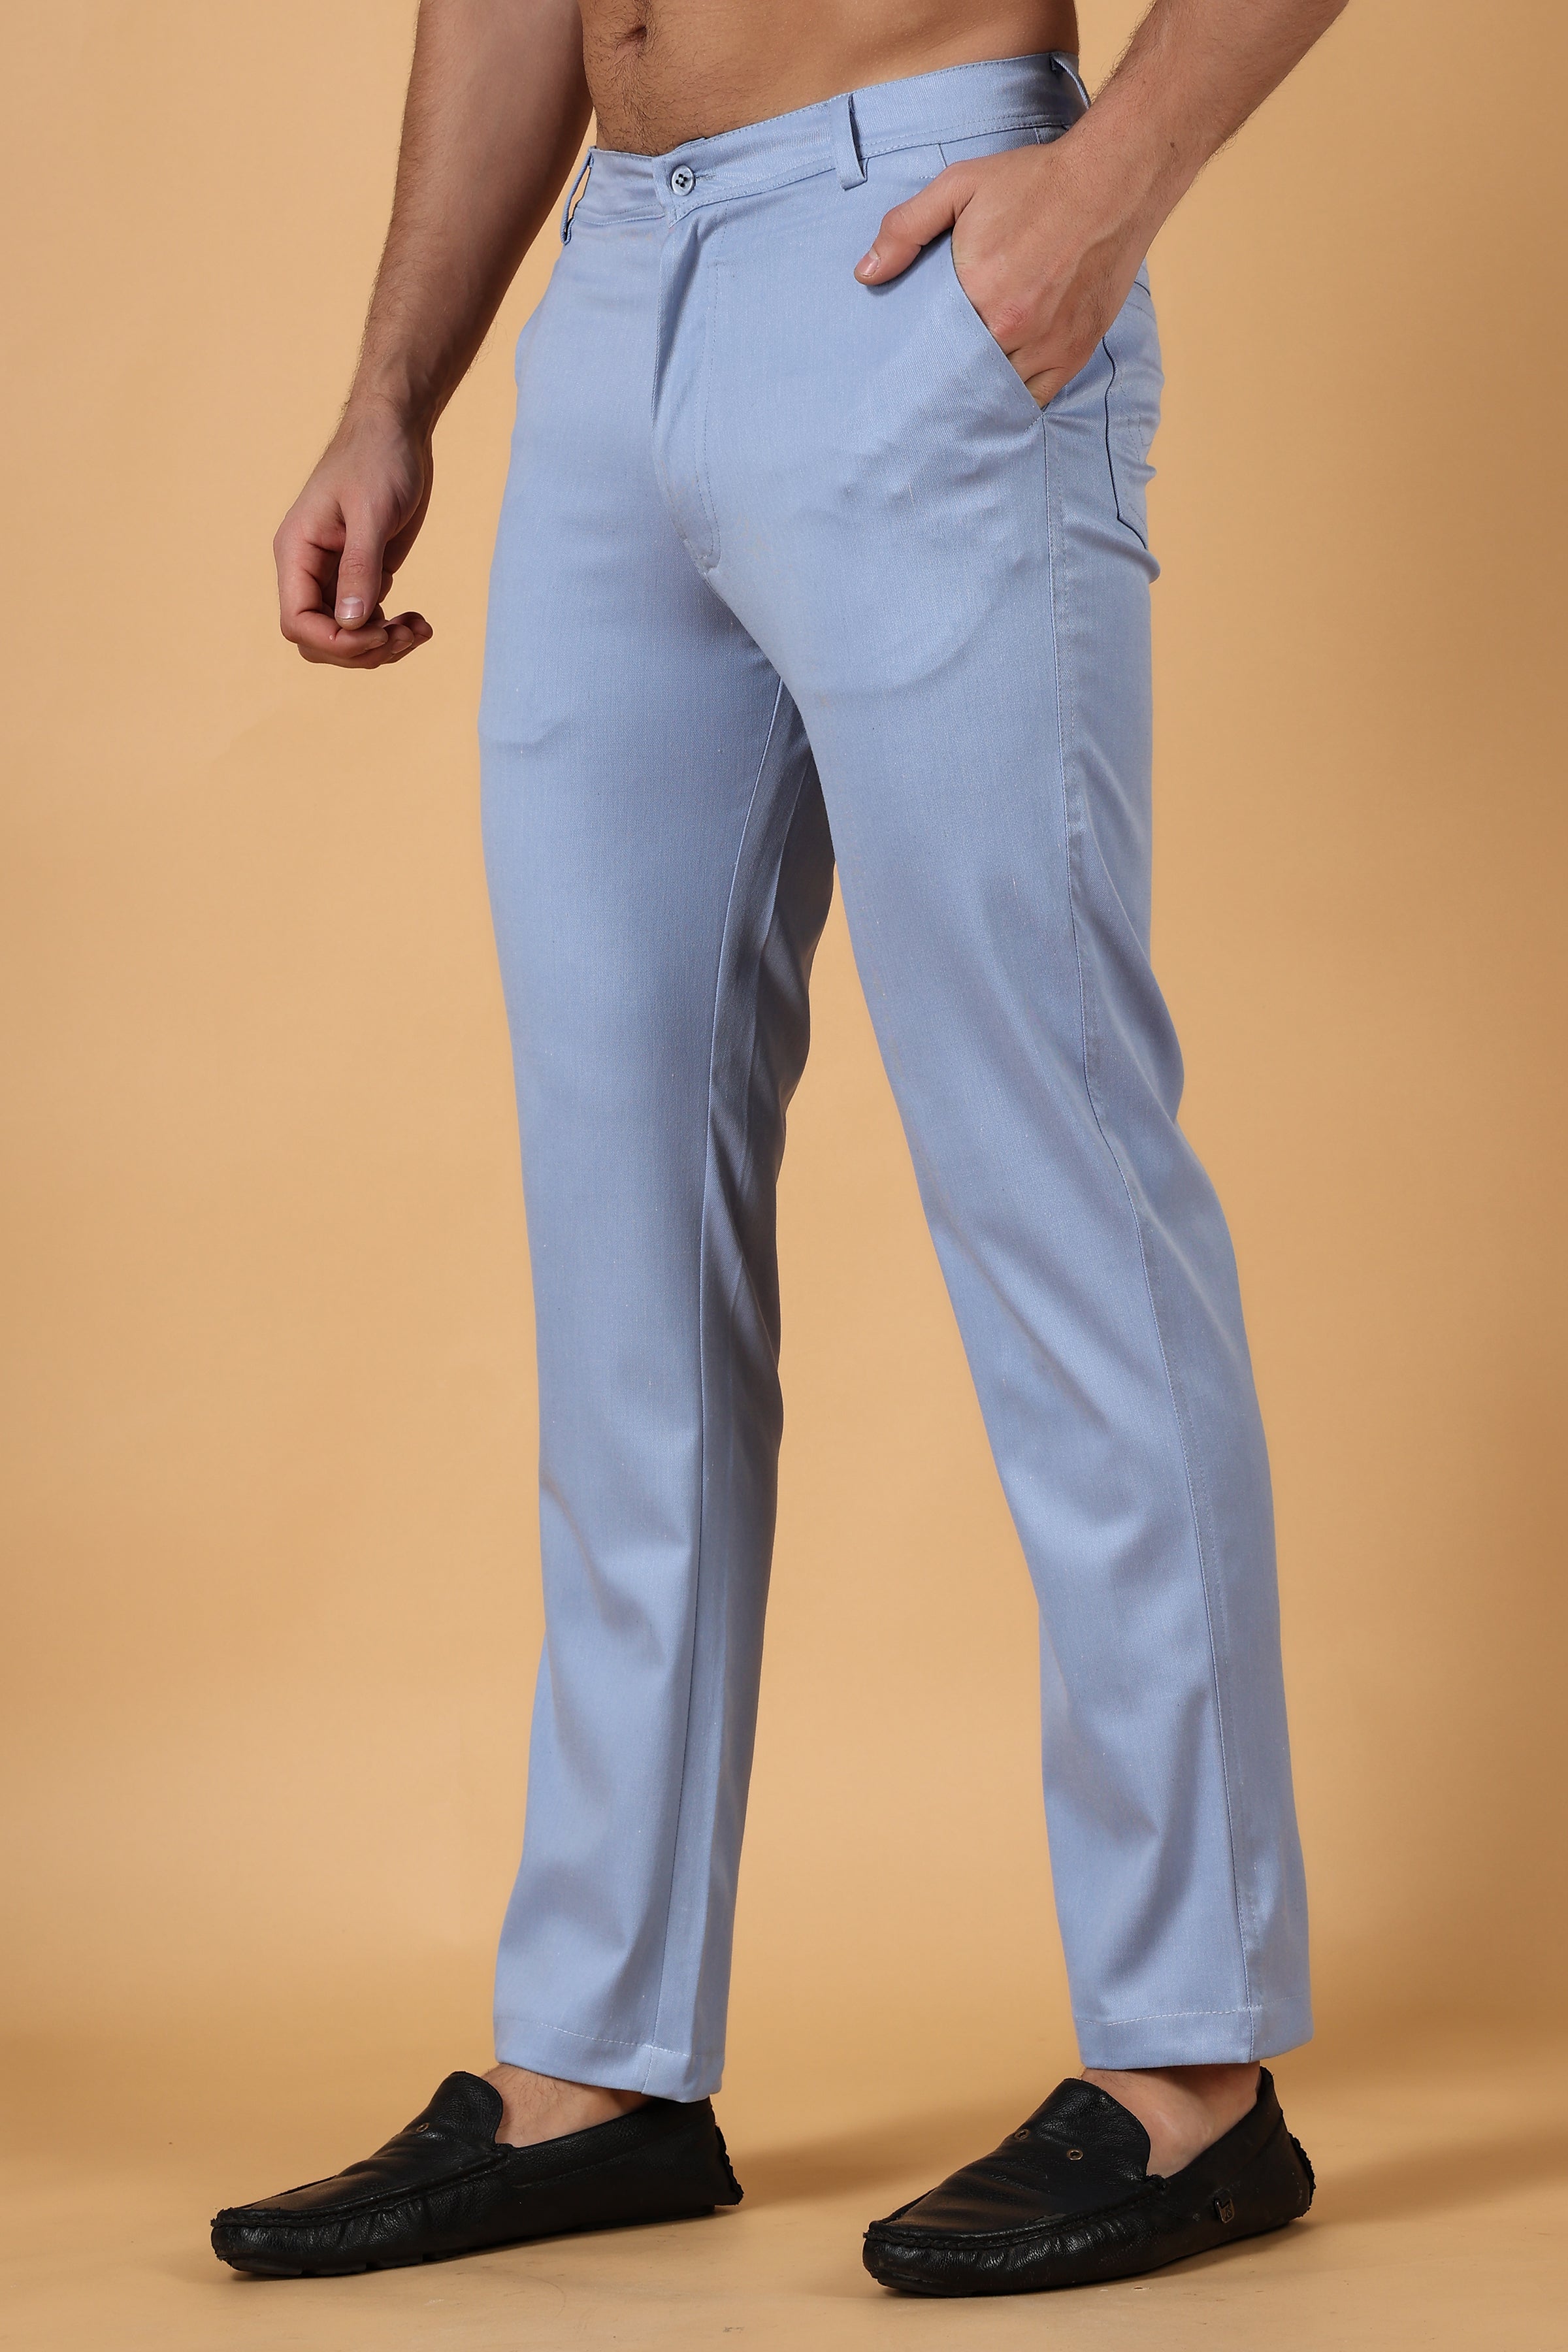 These 27 Mens Chino Pants Are Stylish and Comfortable Options for 2023